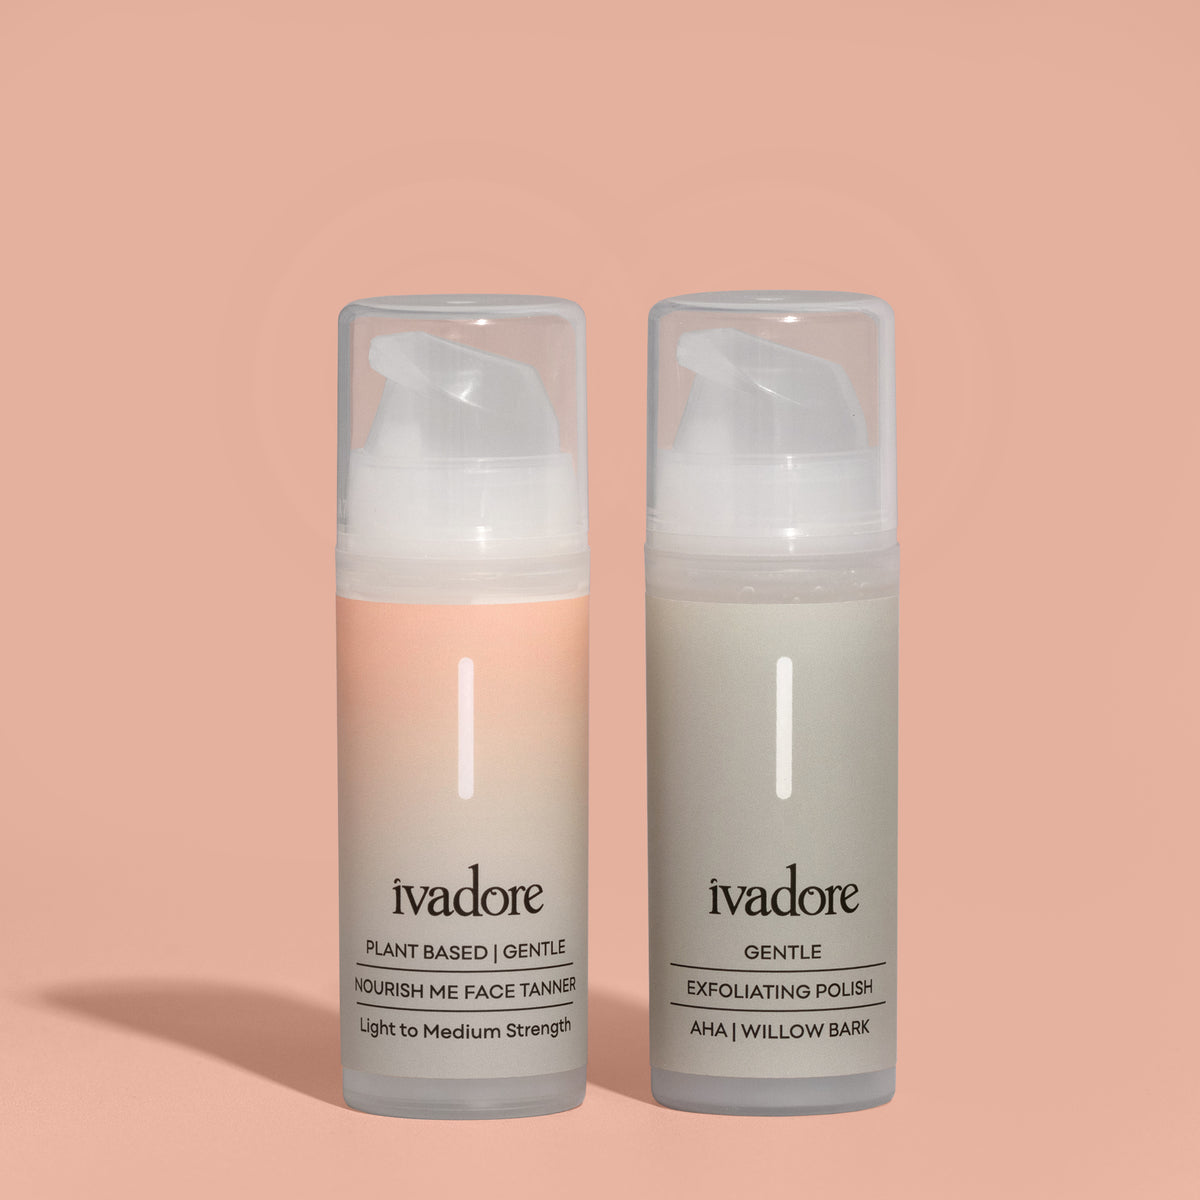 A face tan bottle and an exfoliating polish bottle standing side by side on peach coloured background.